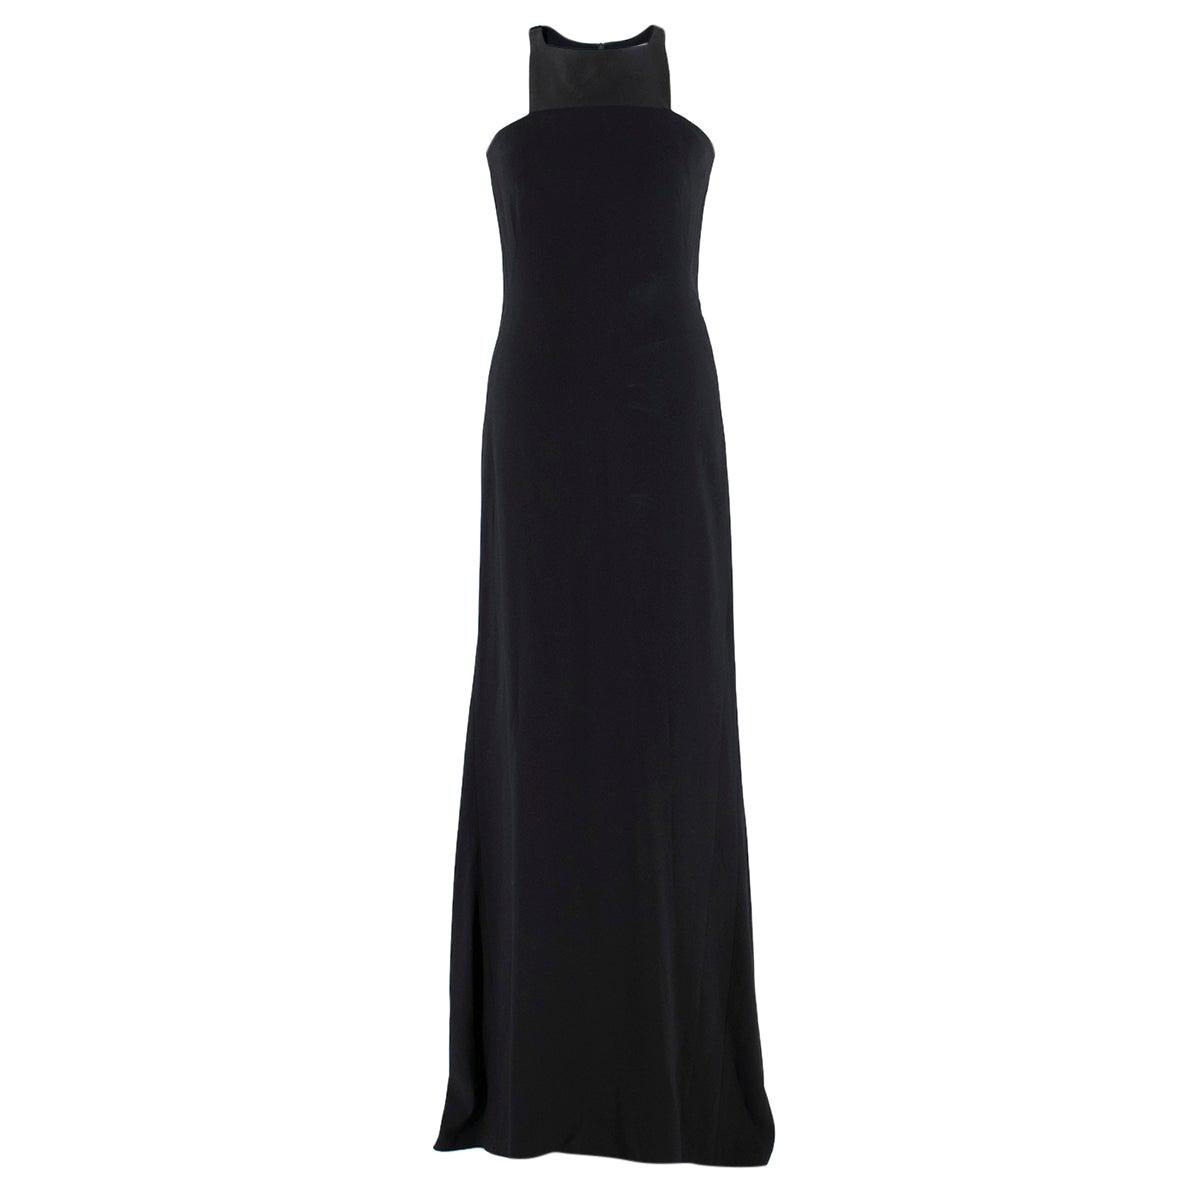 Osman Black Long Dress with Leather Collar estimated SIZE XS-S